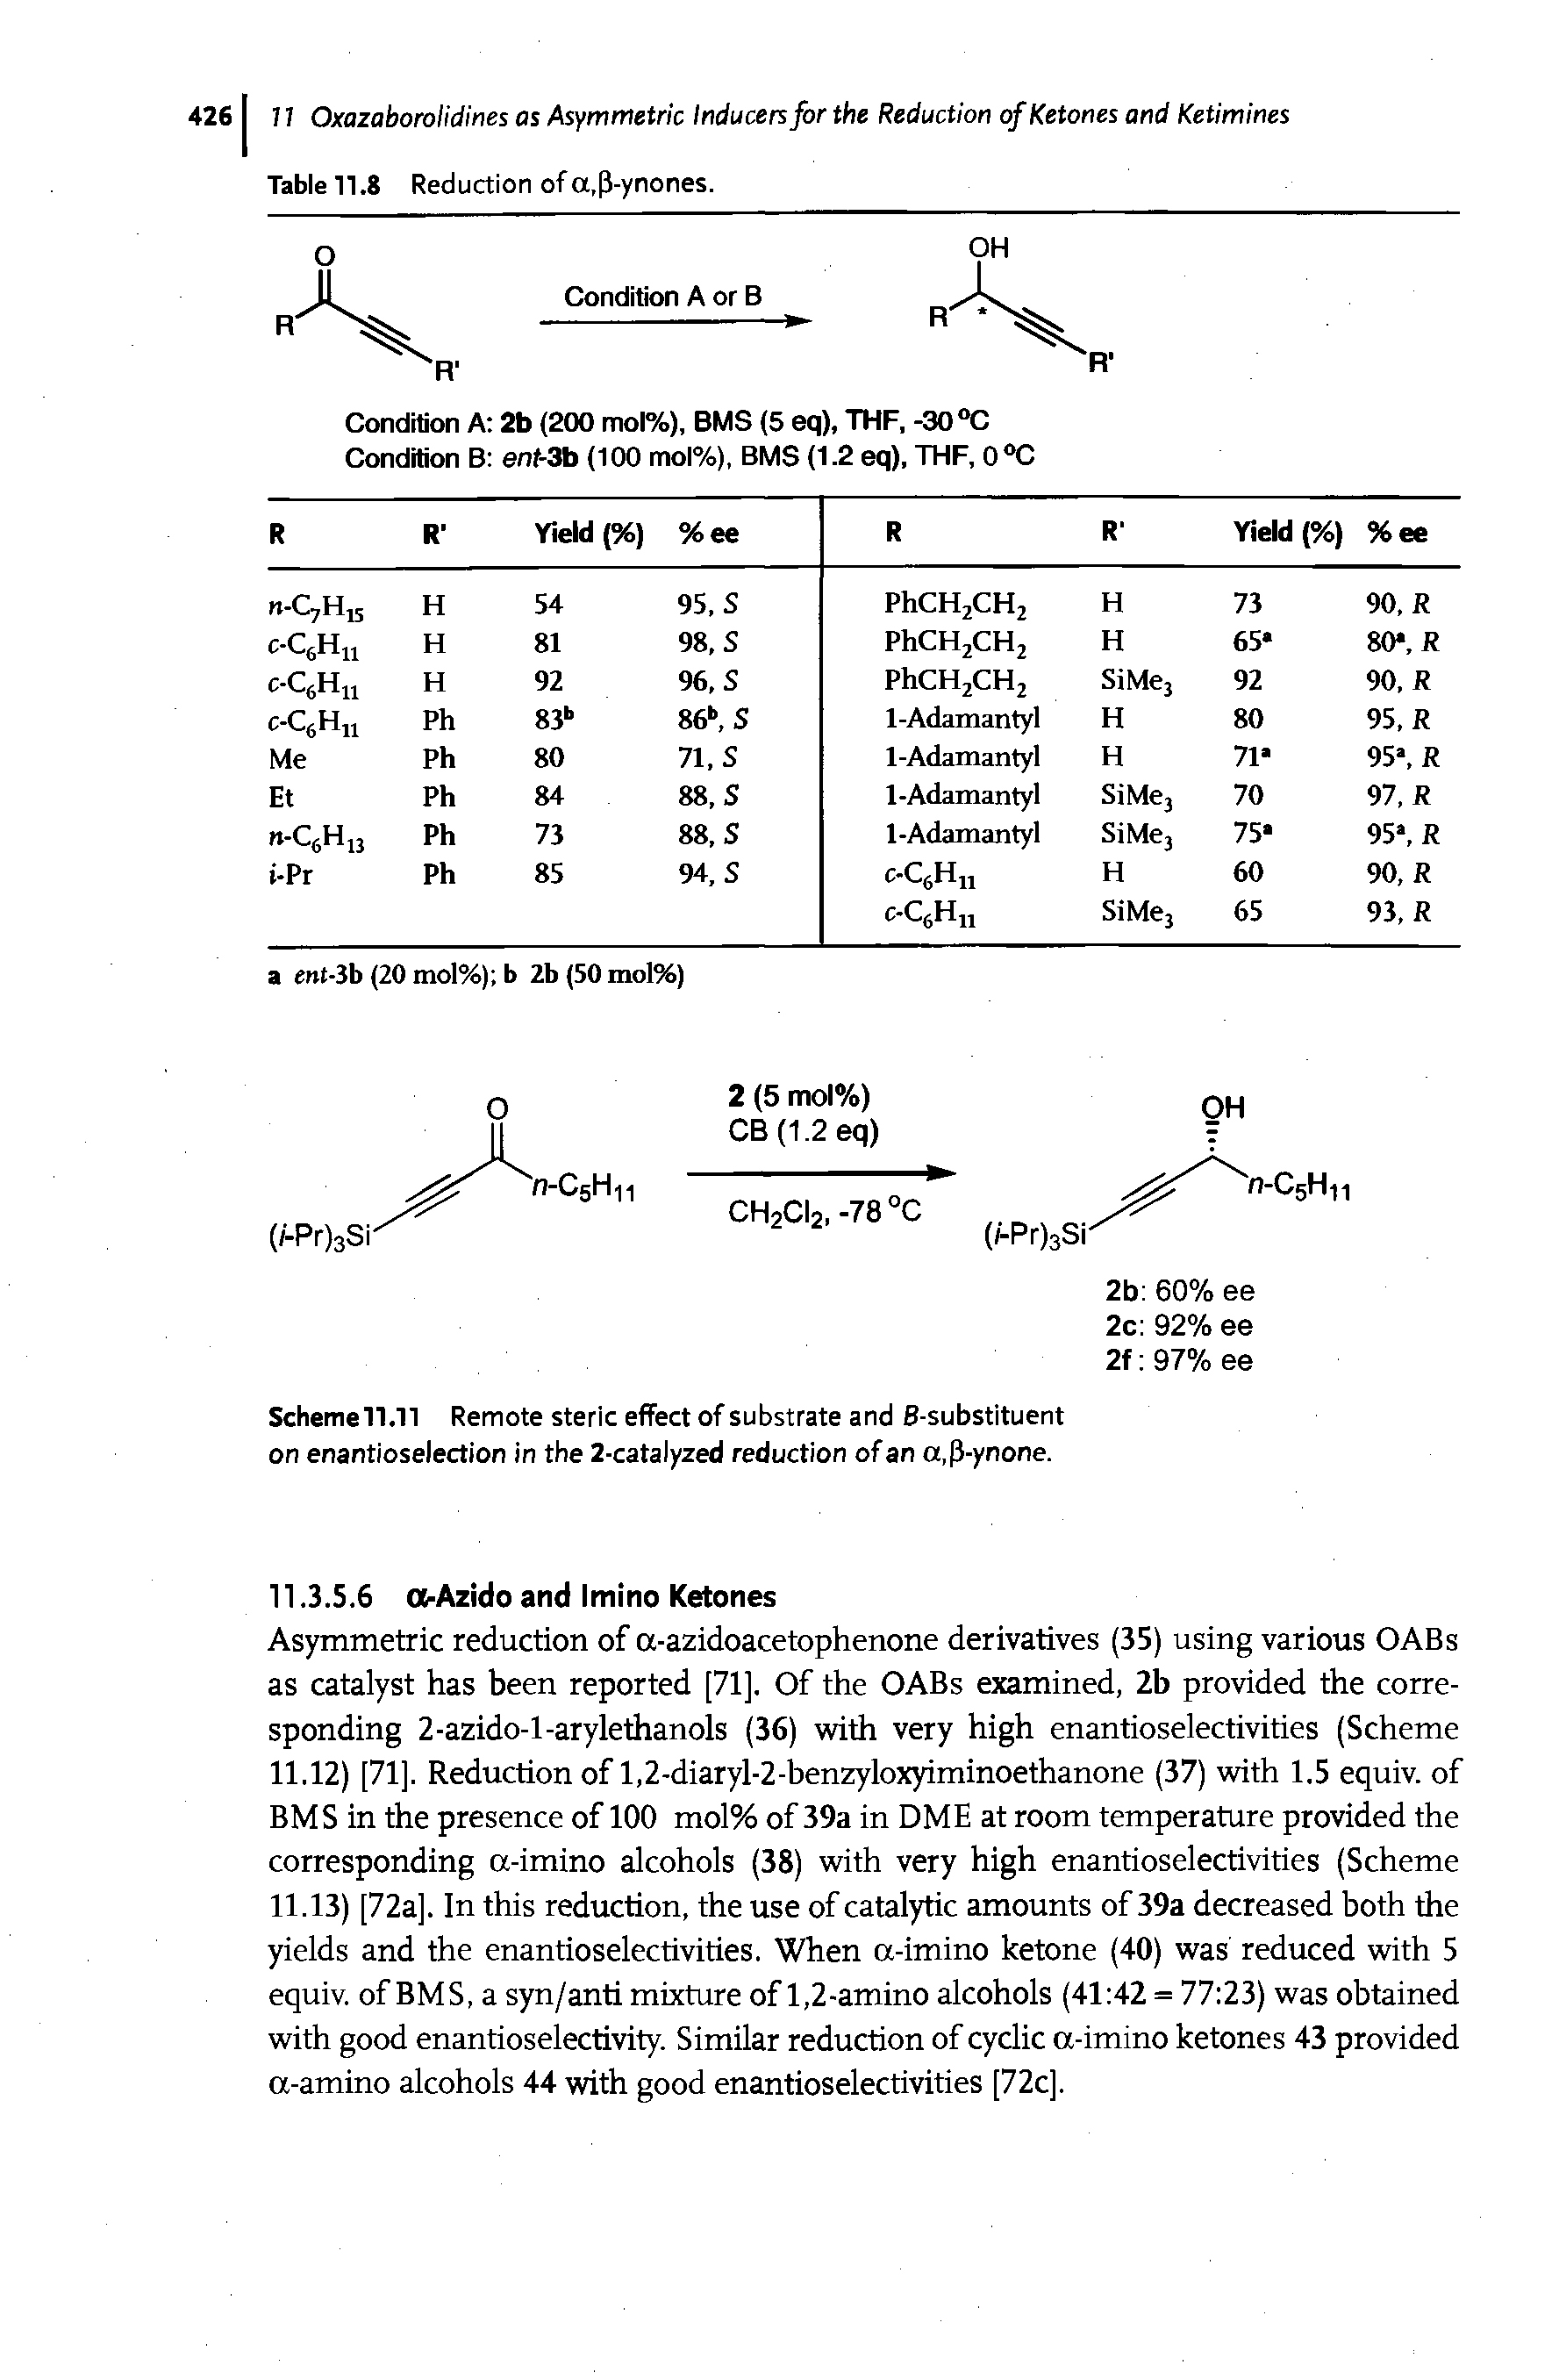 Scheme11.11 Remote steric effect of substrate and 6-substituent on enantioselection in the 2-catalyzed reduction of an a,P-ynone.